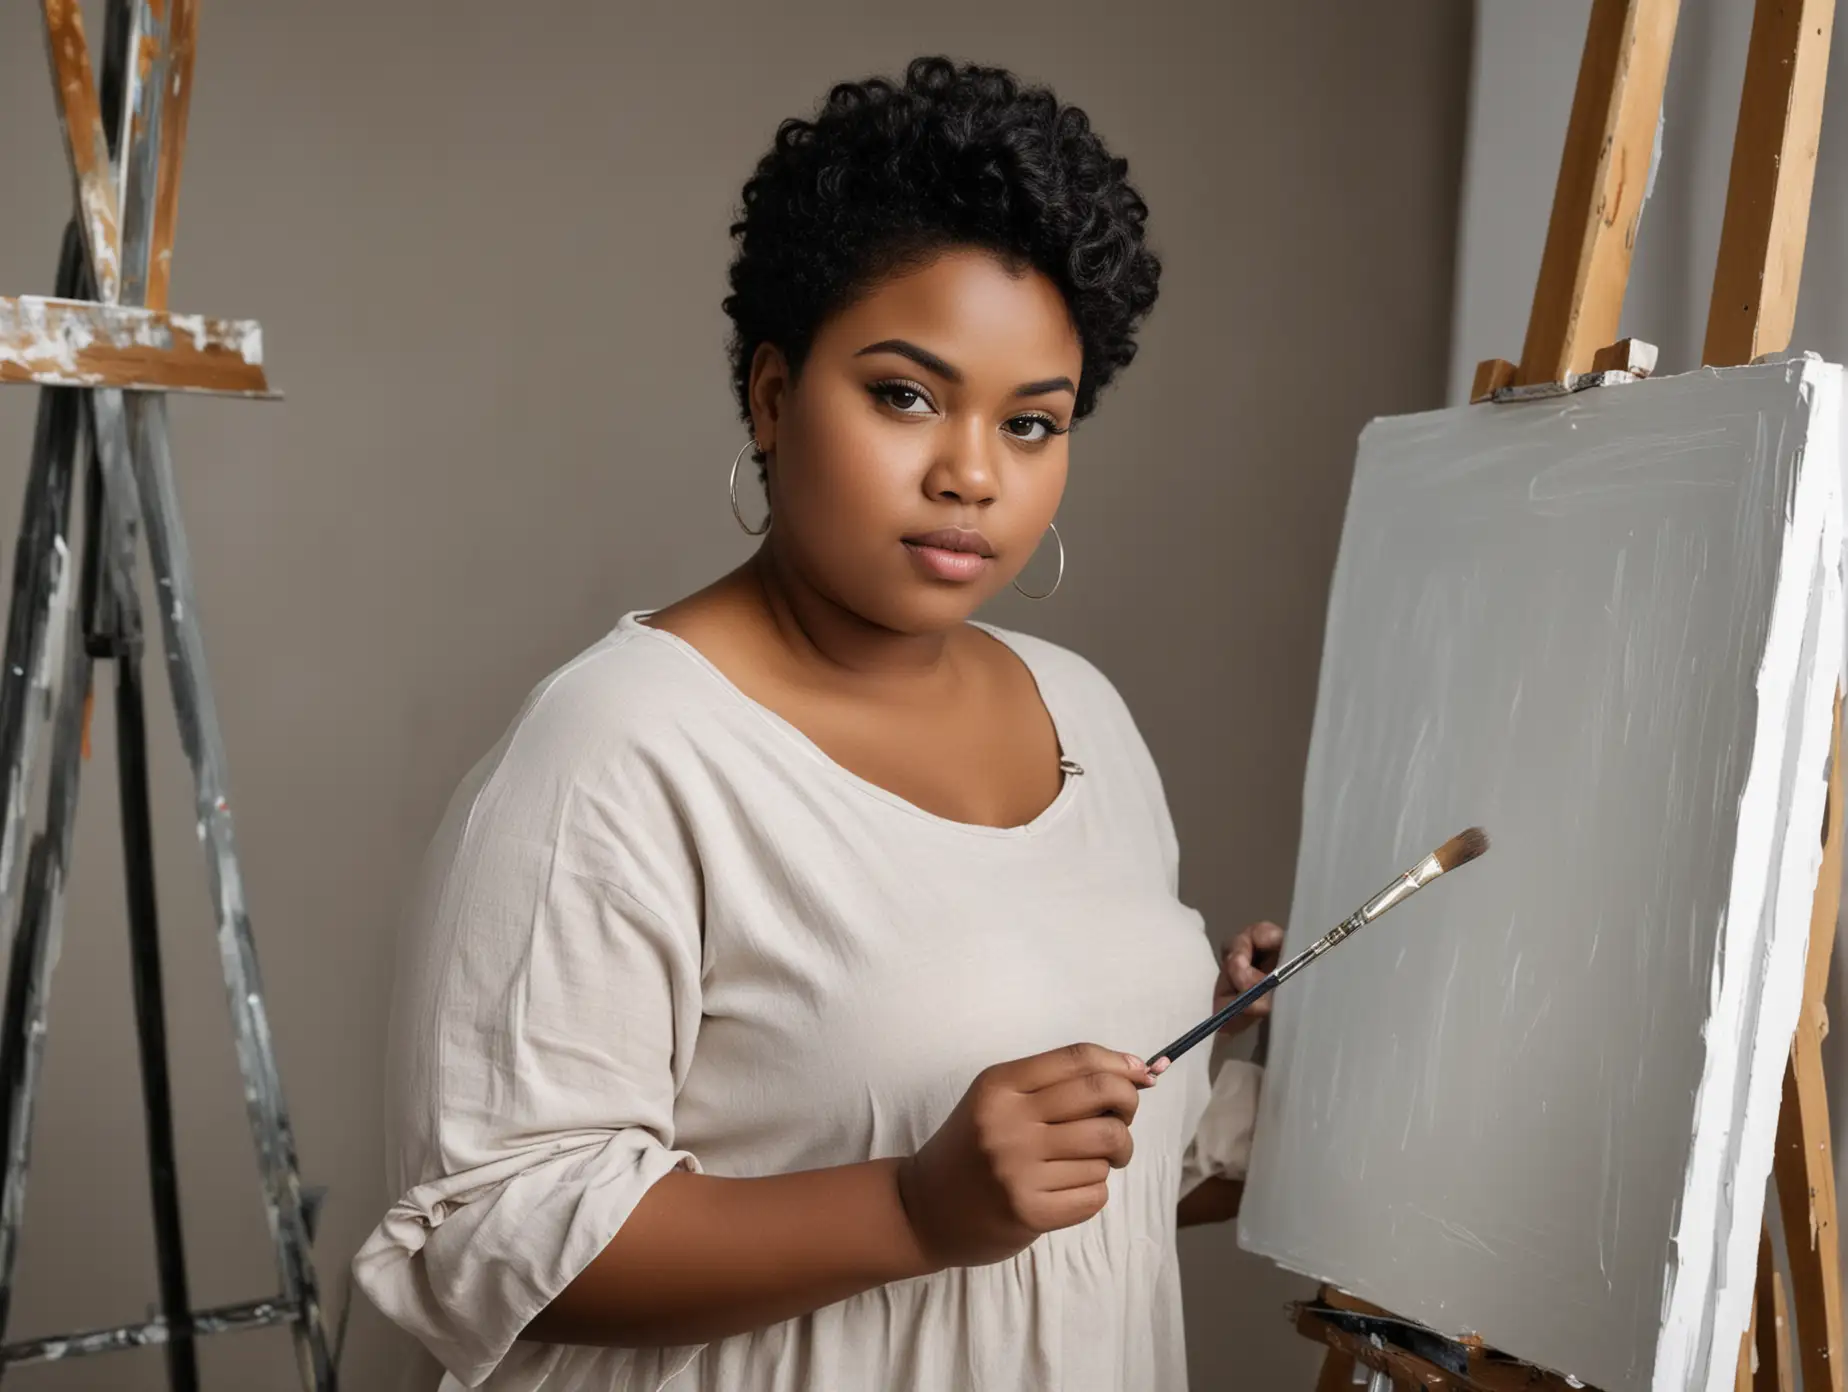 beautiful black girl, overweight, natural short black hair, painting on an easel 